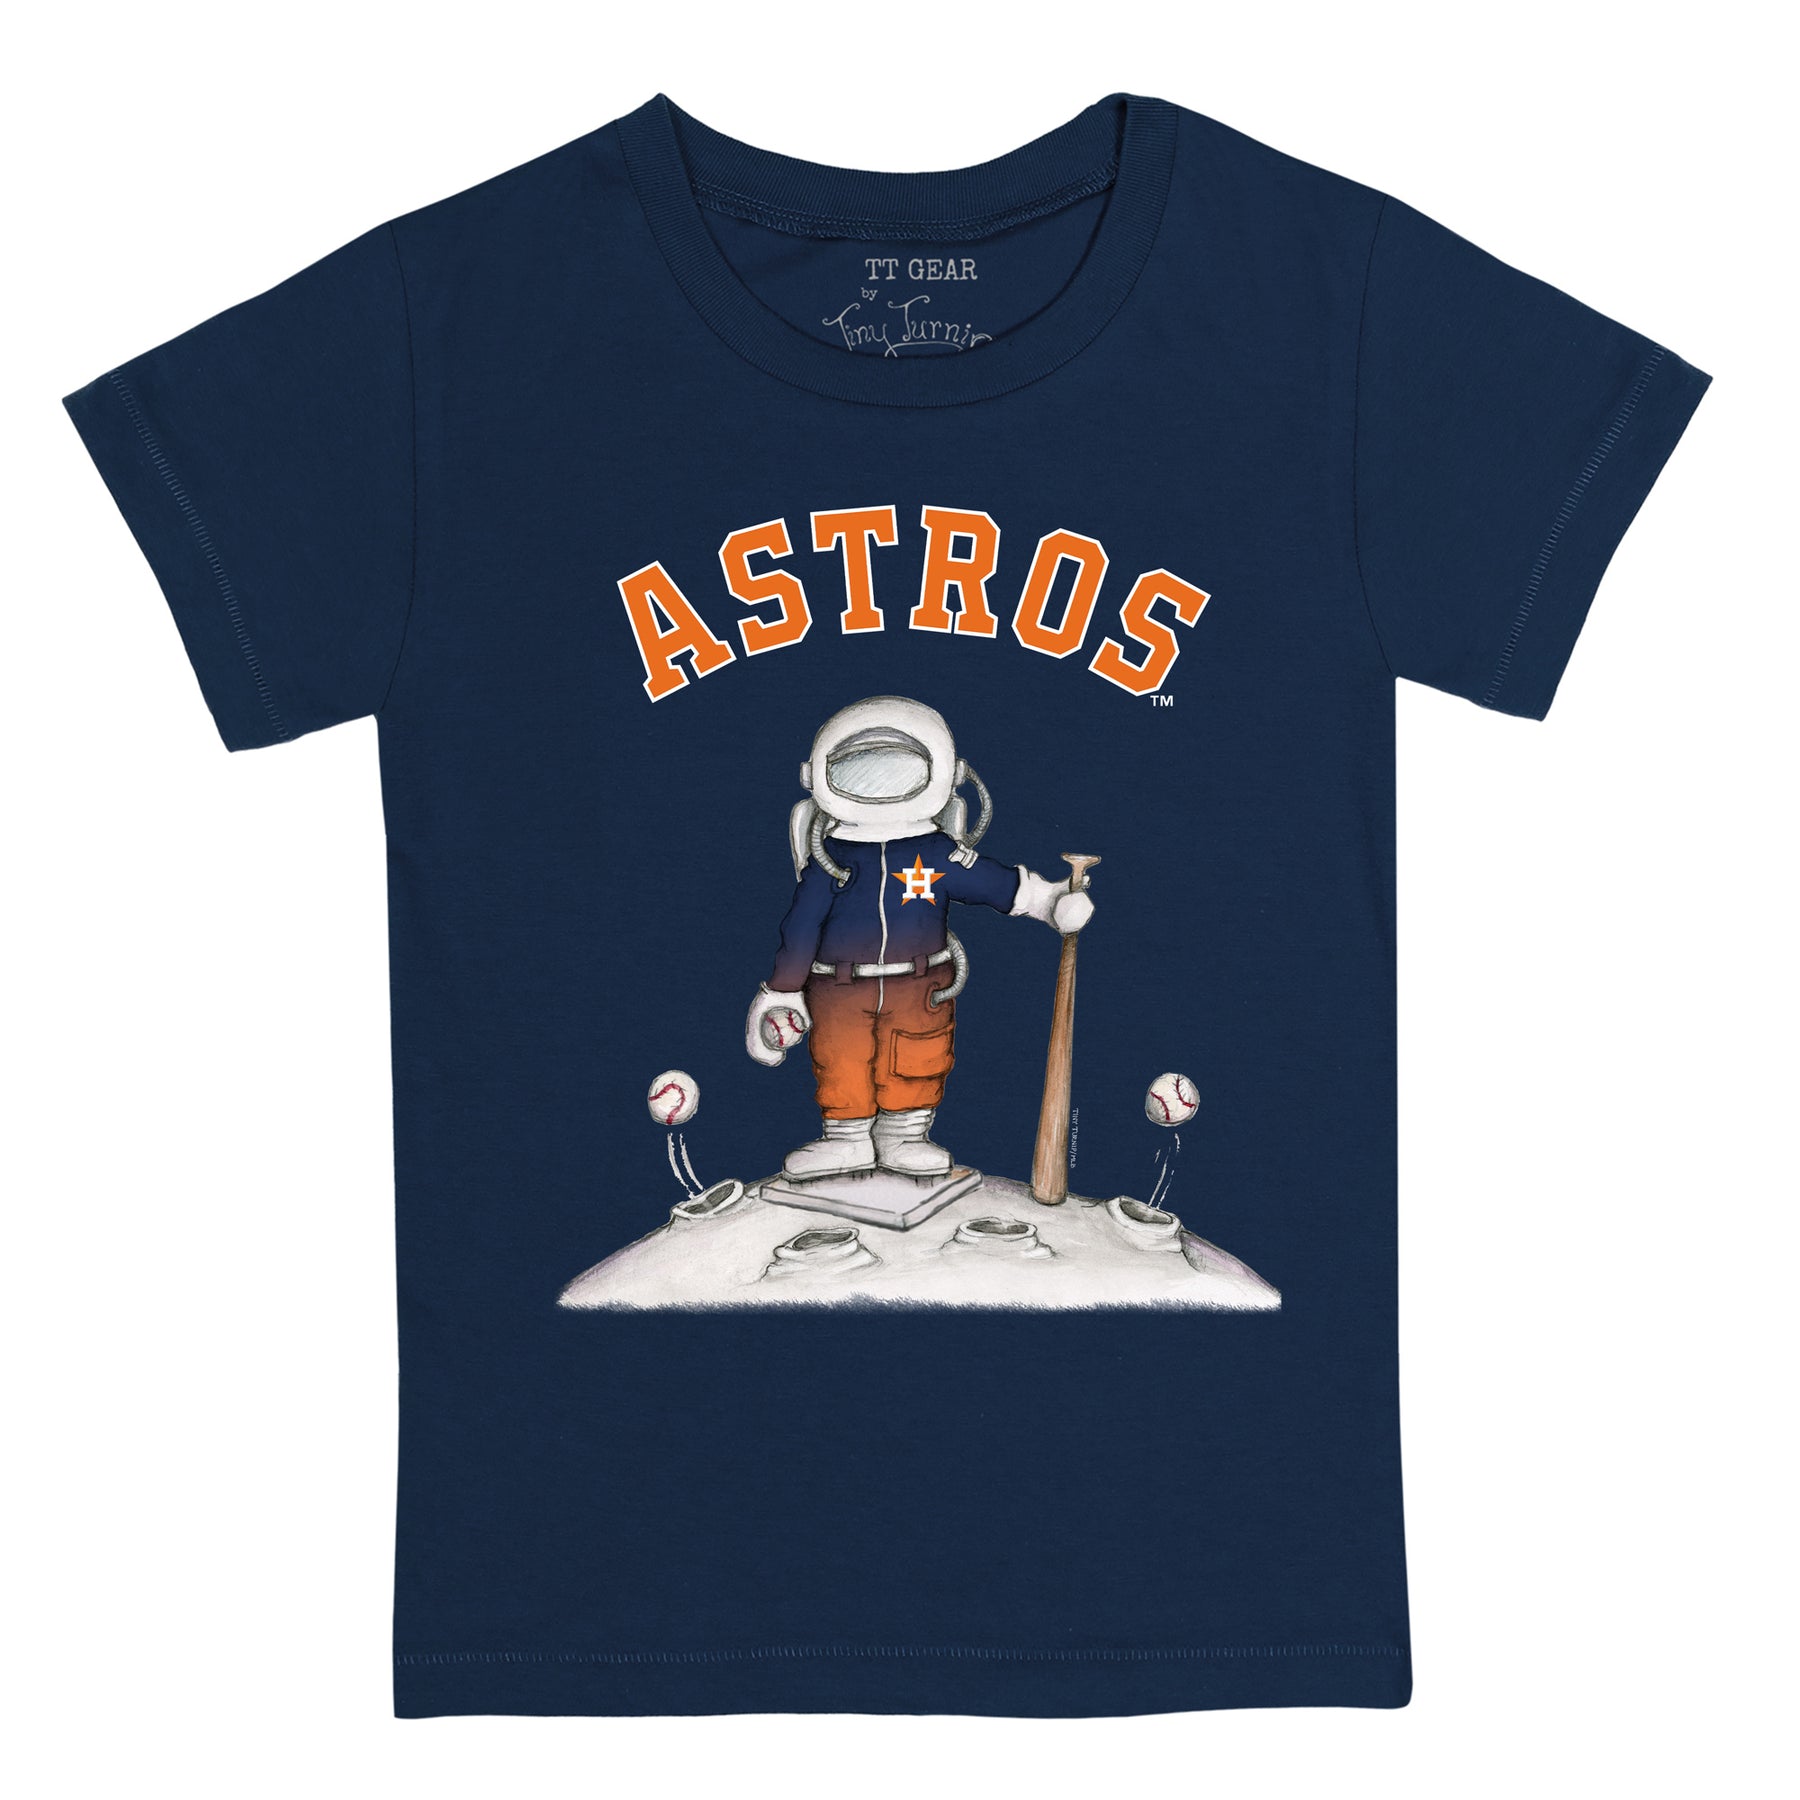 Ready for the Astros game tonight? Get your Mitchell & Ness